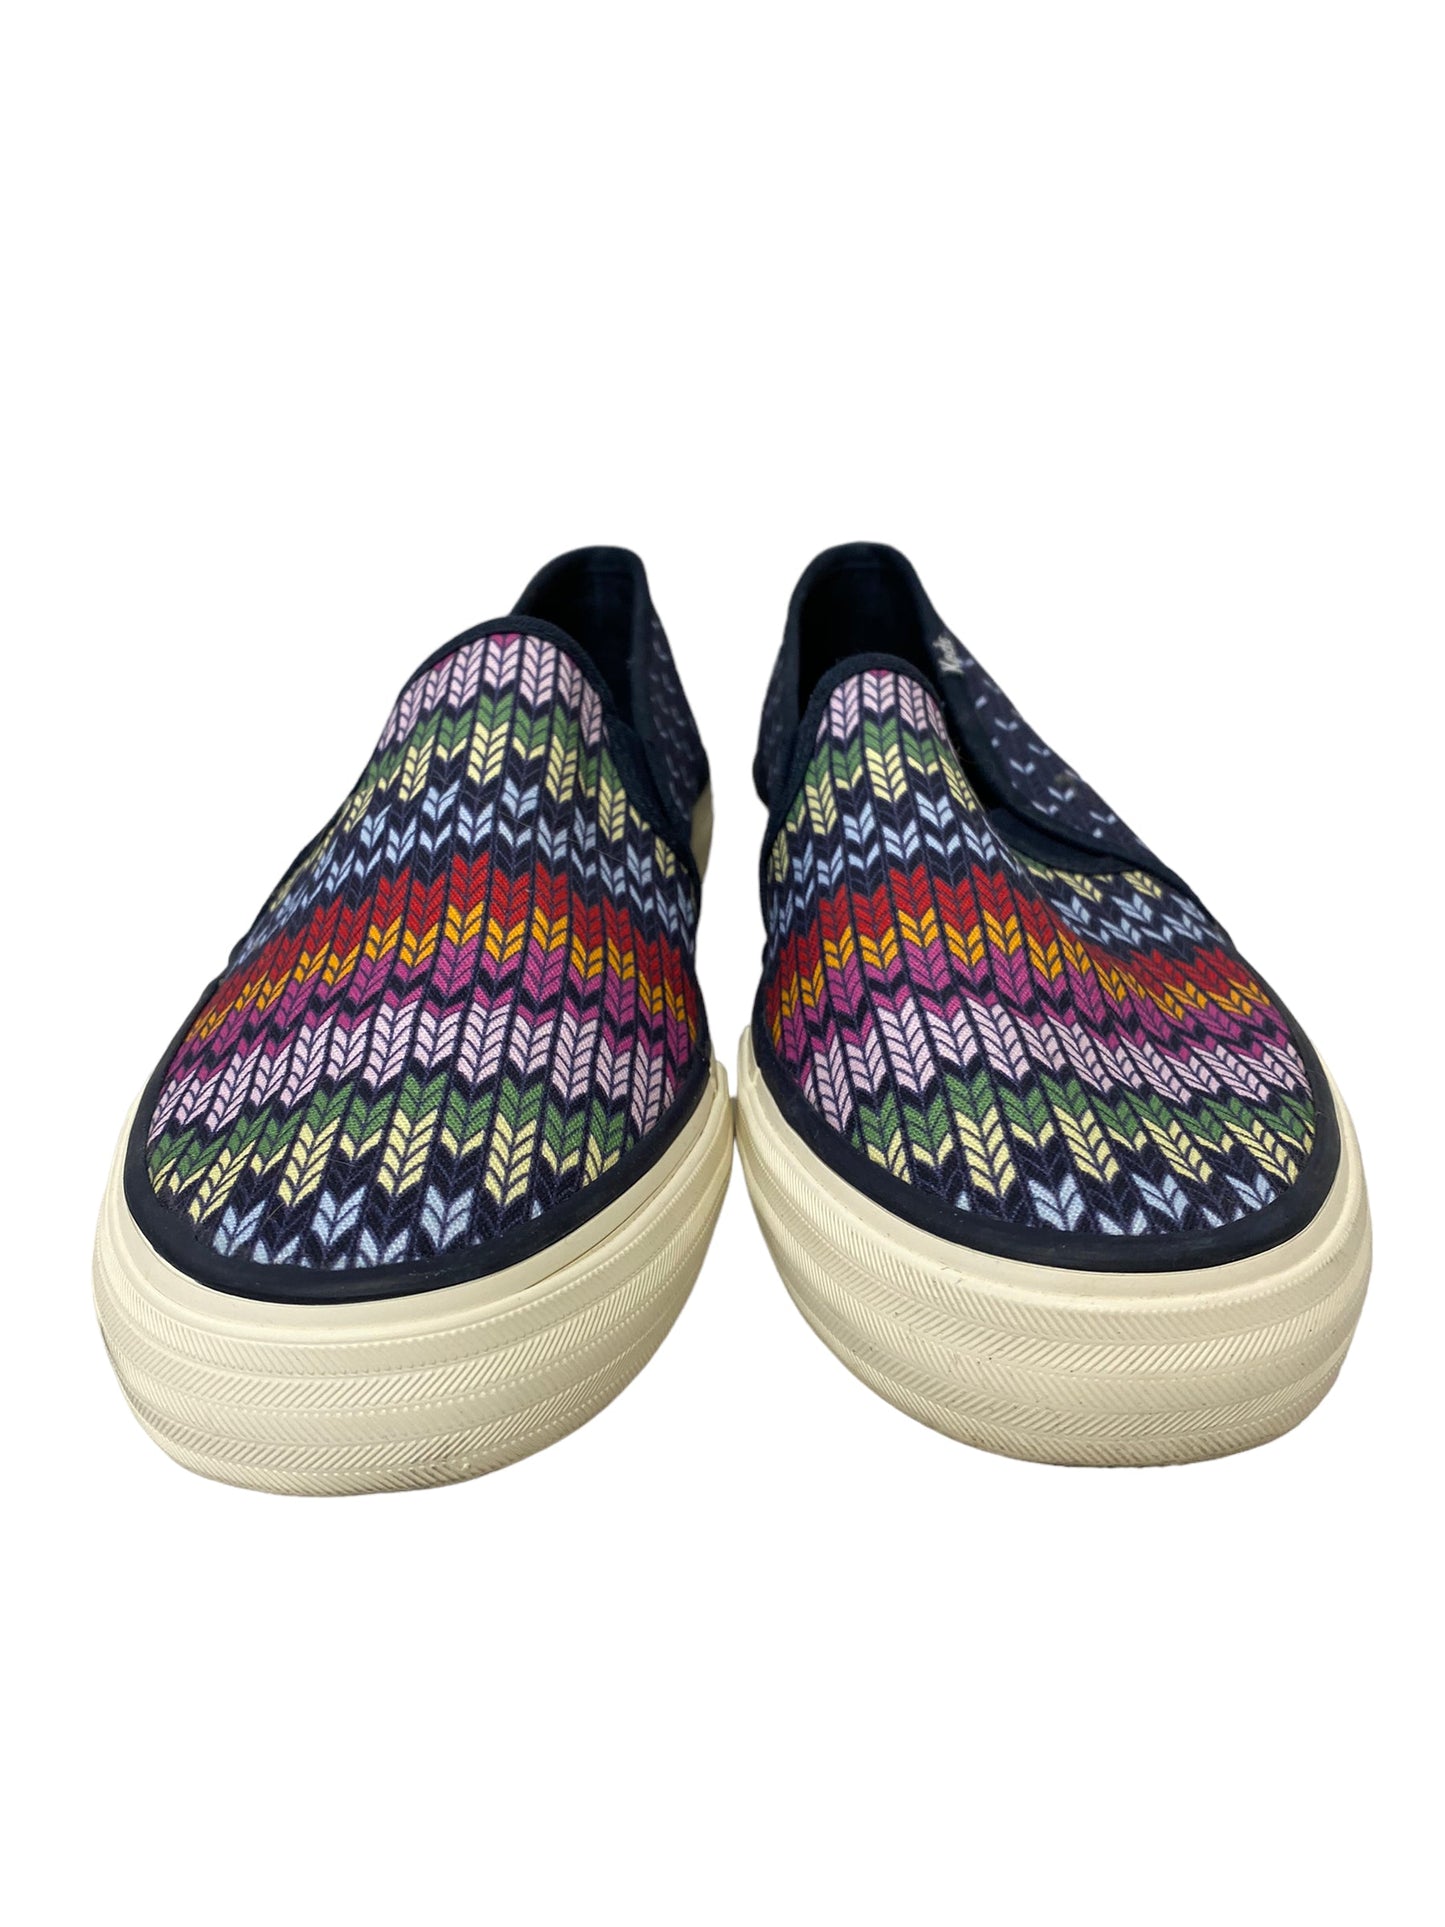 Shoes Flats Boat By Keds  Size: 8